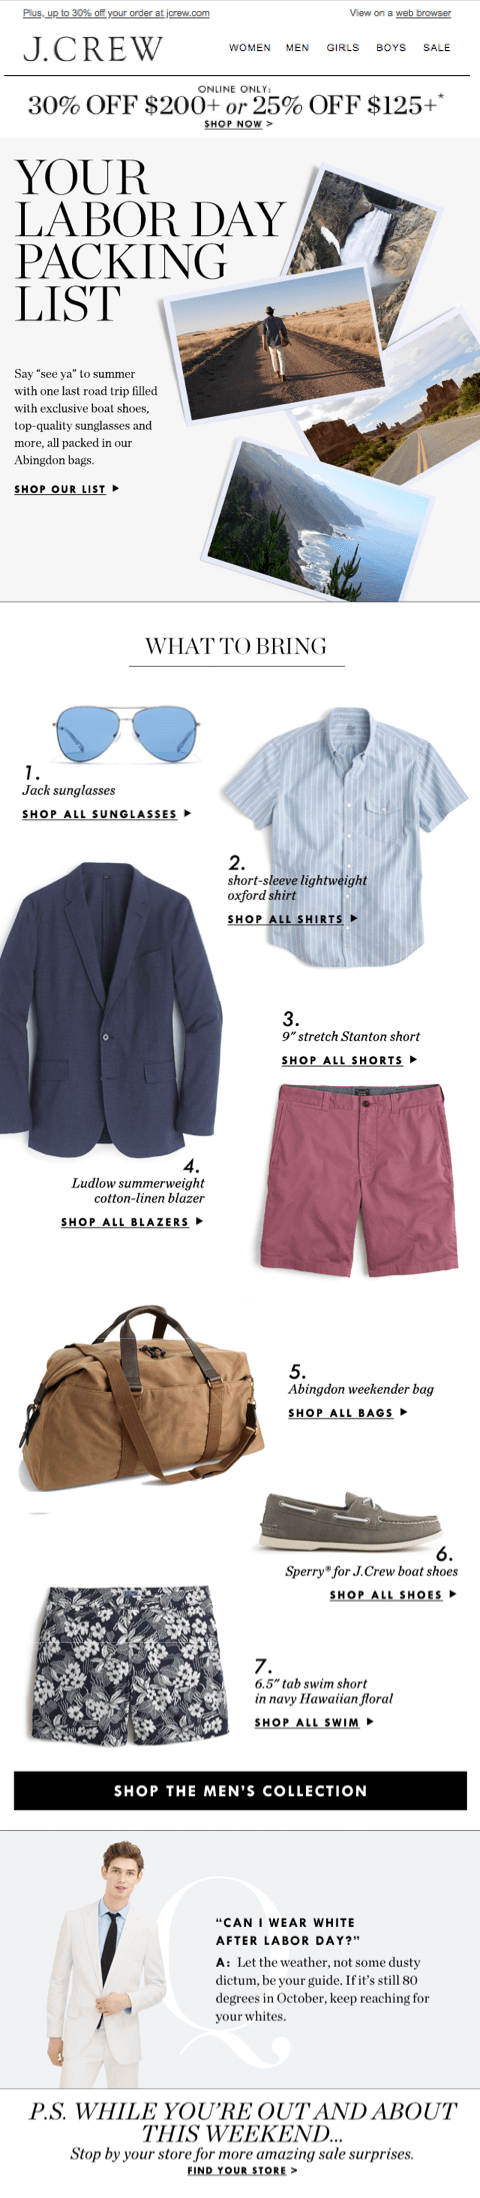 J-Crew-Labor-Day-Packing-List--2-